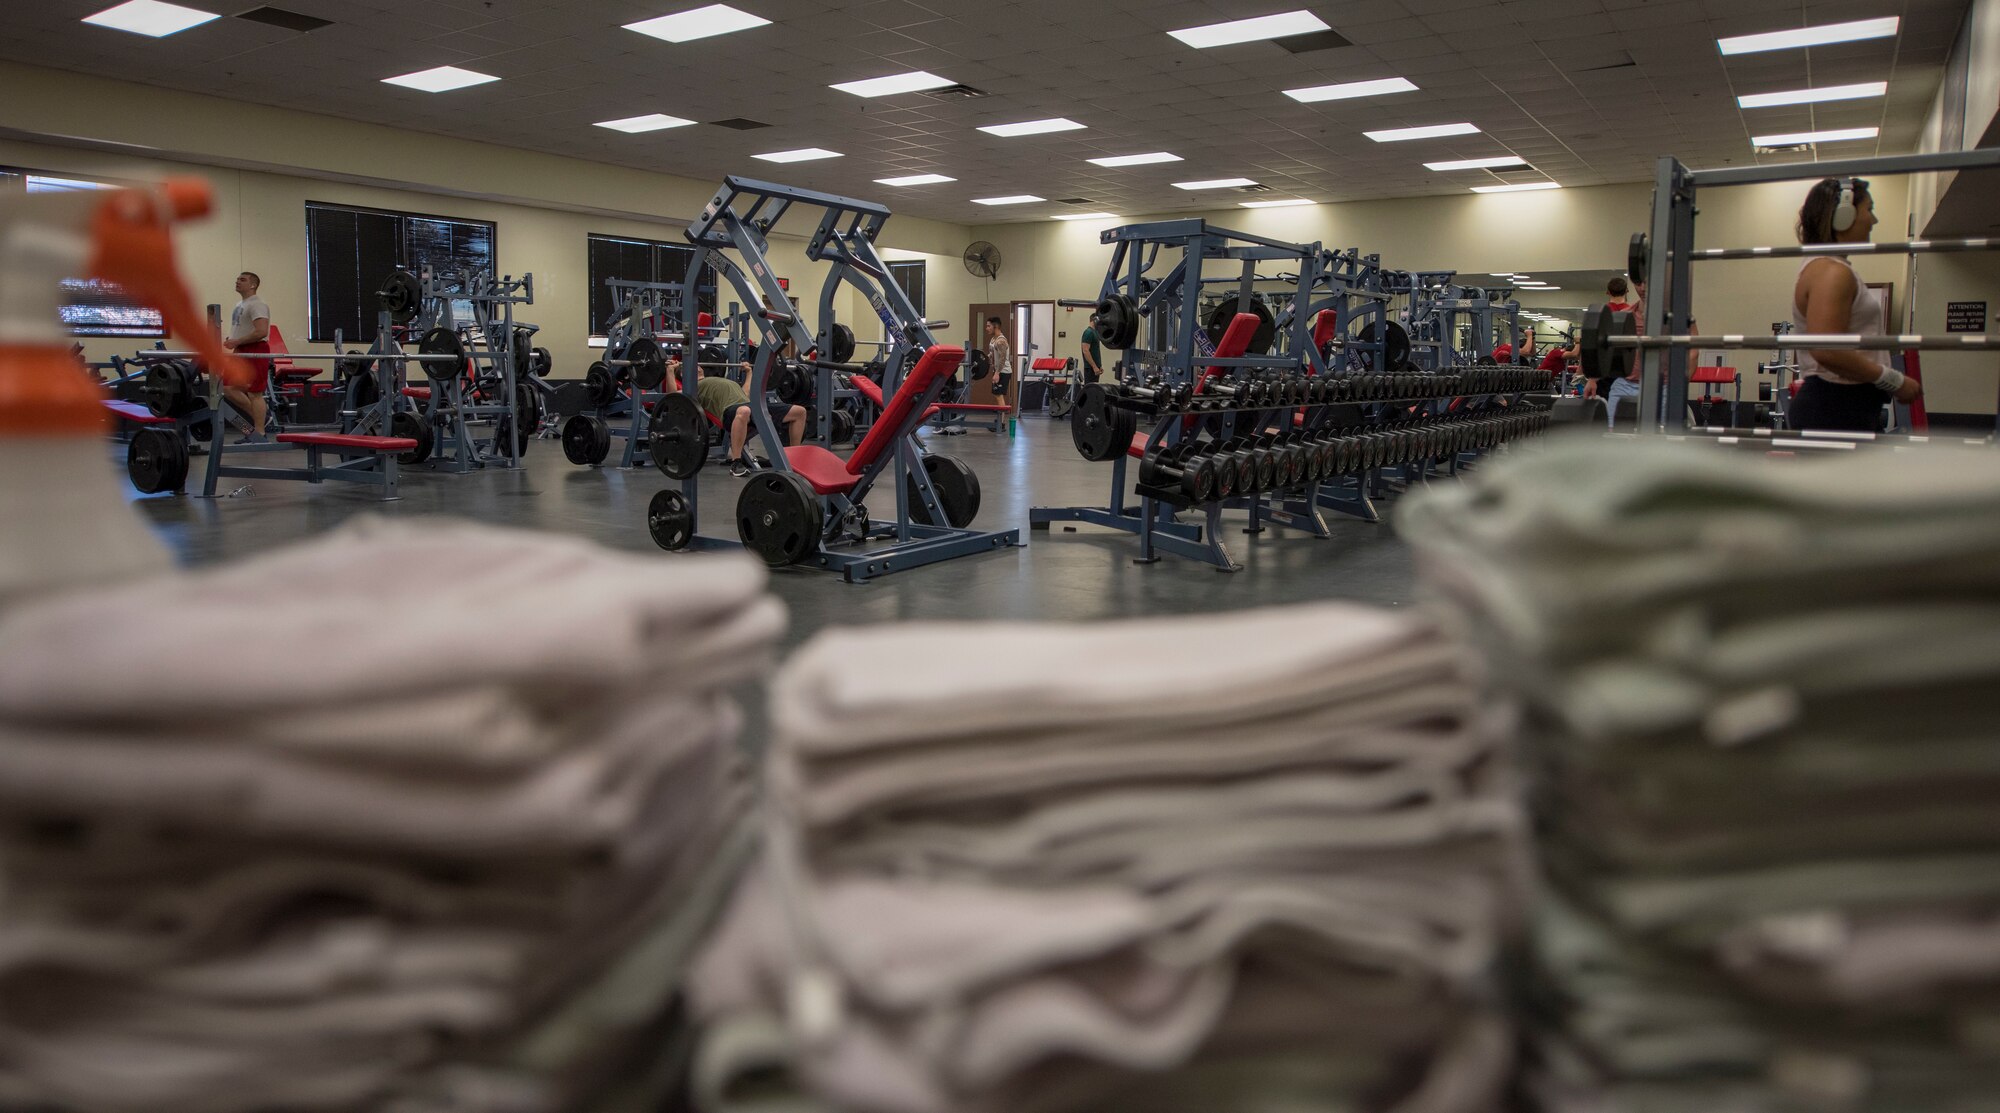 Maintaining four pillars of Comprehensive Airman Fitness: physical fitness